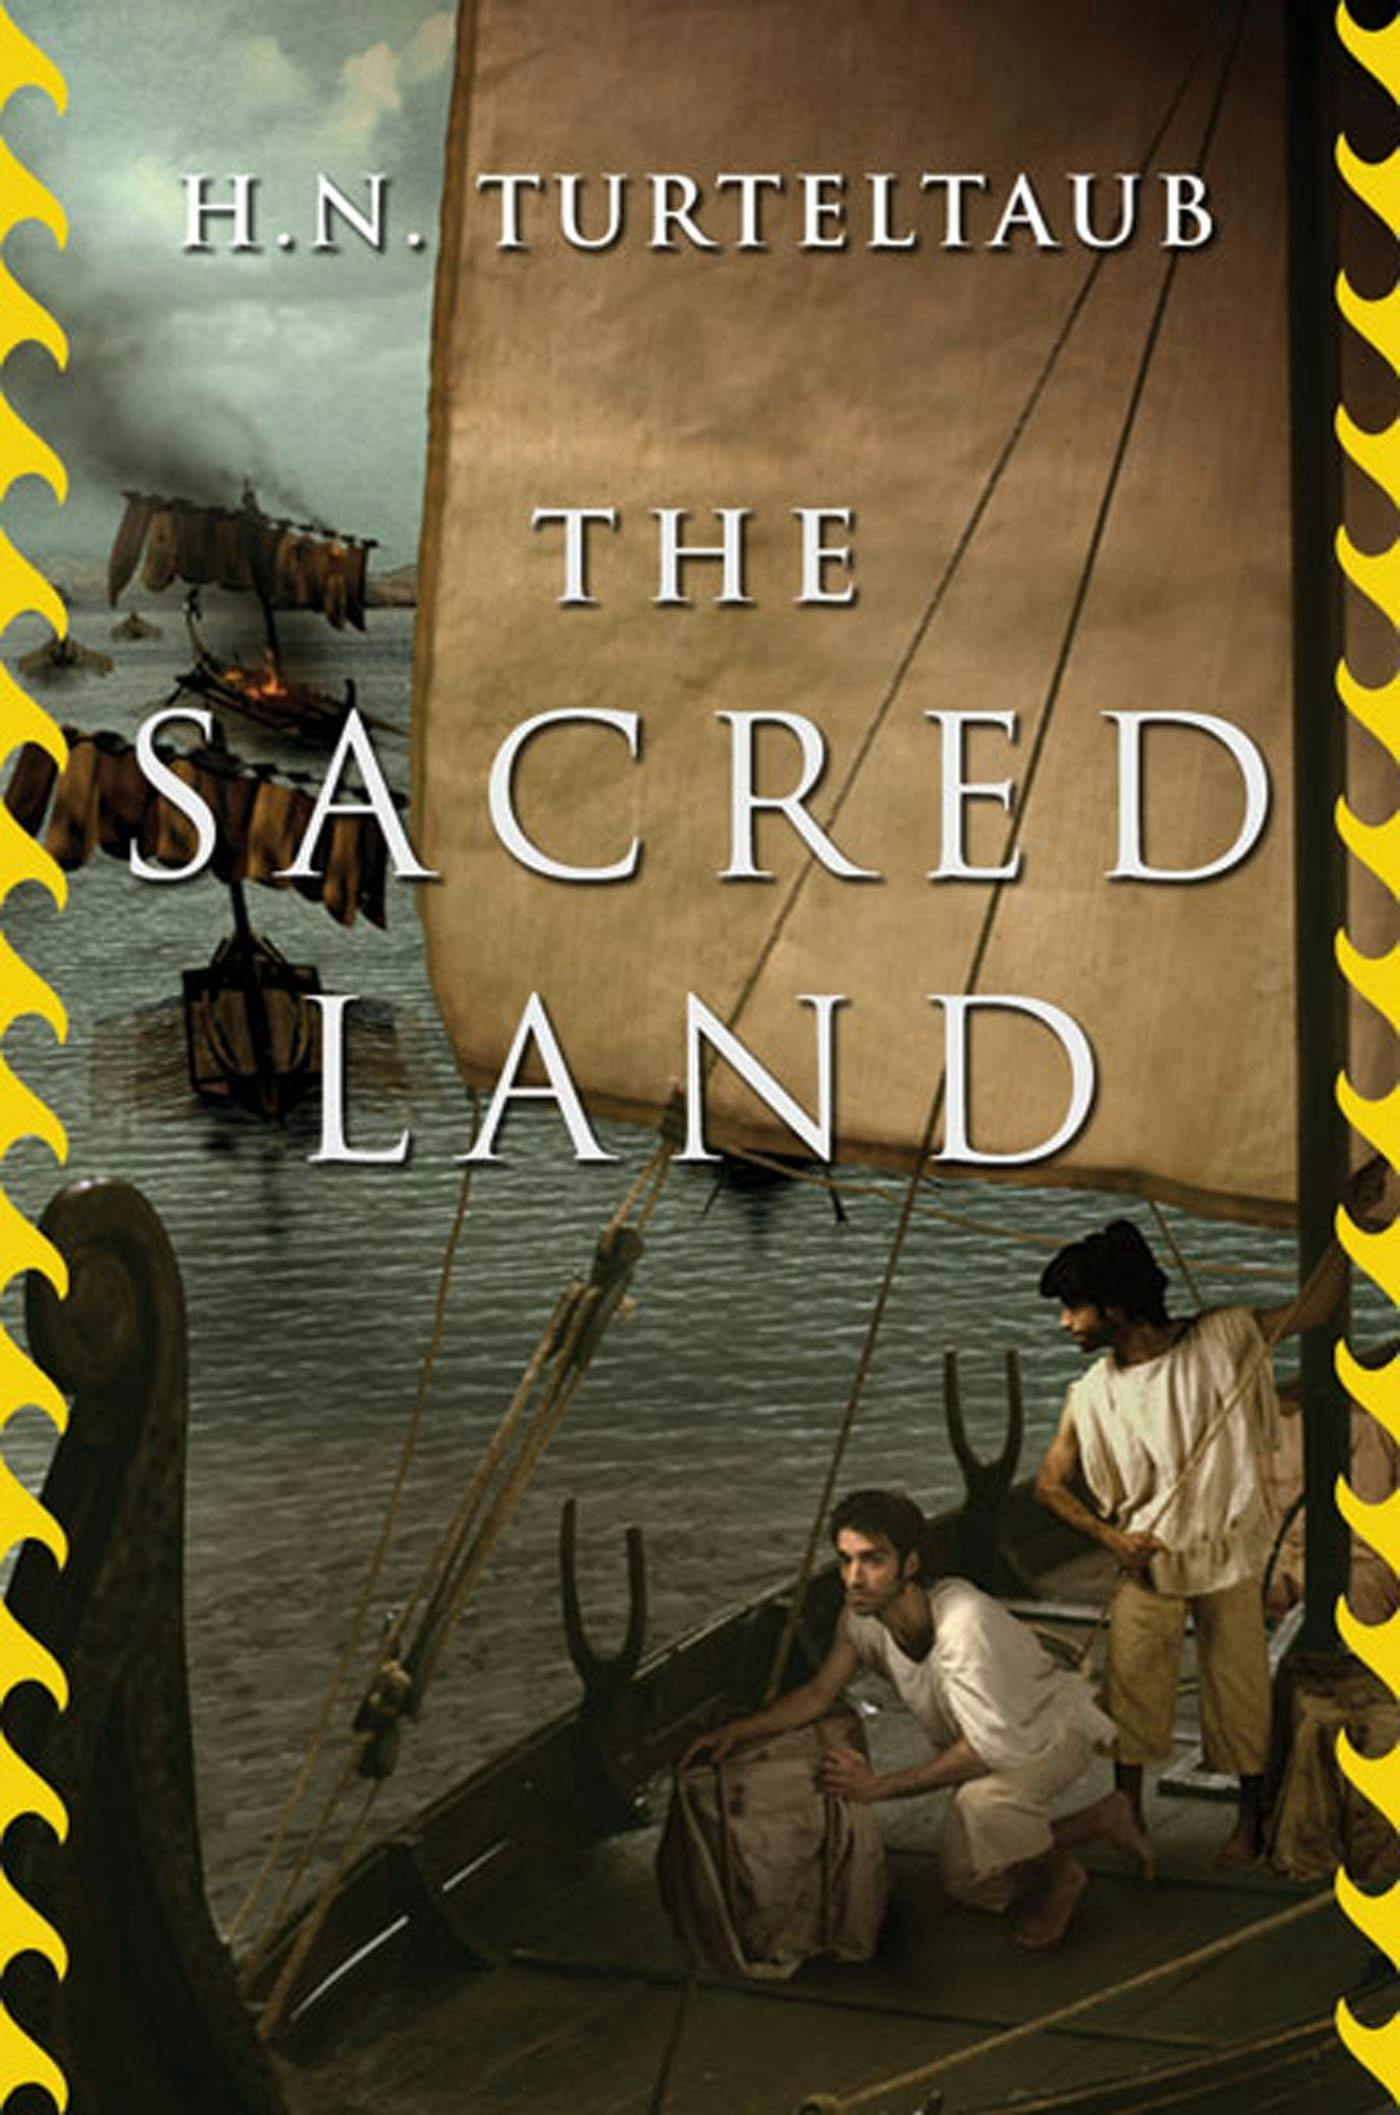 Cover for the book titled as: The Sacred Land